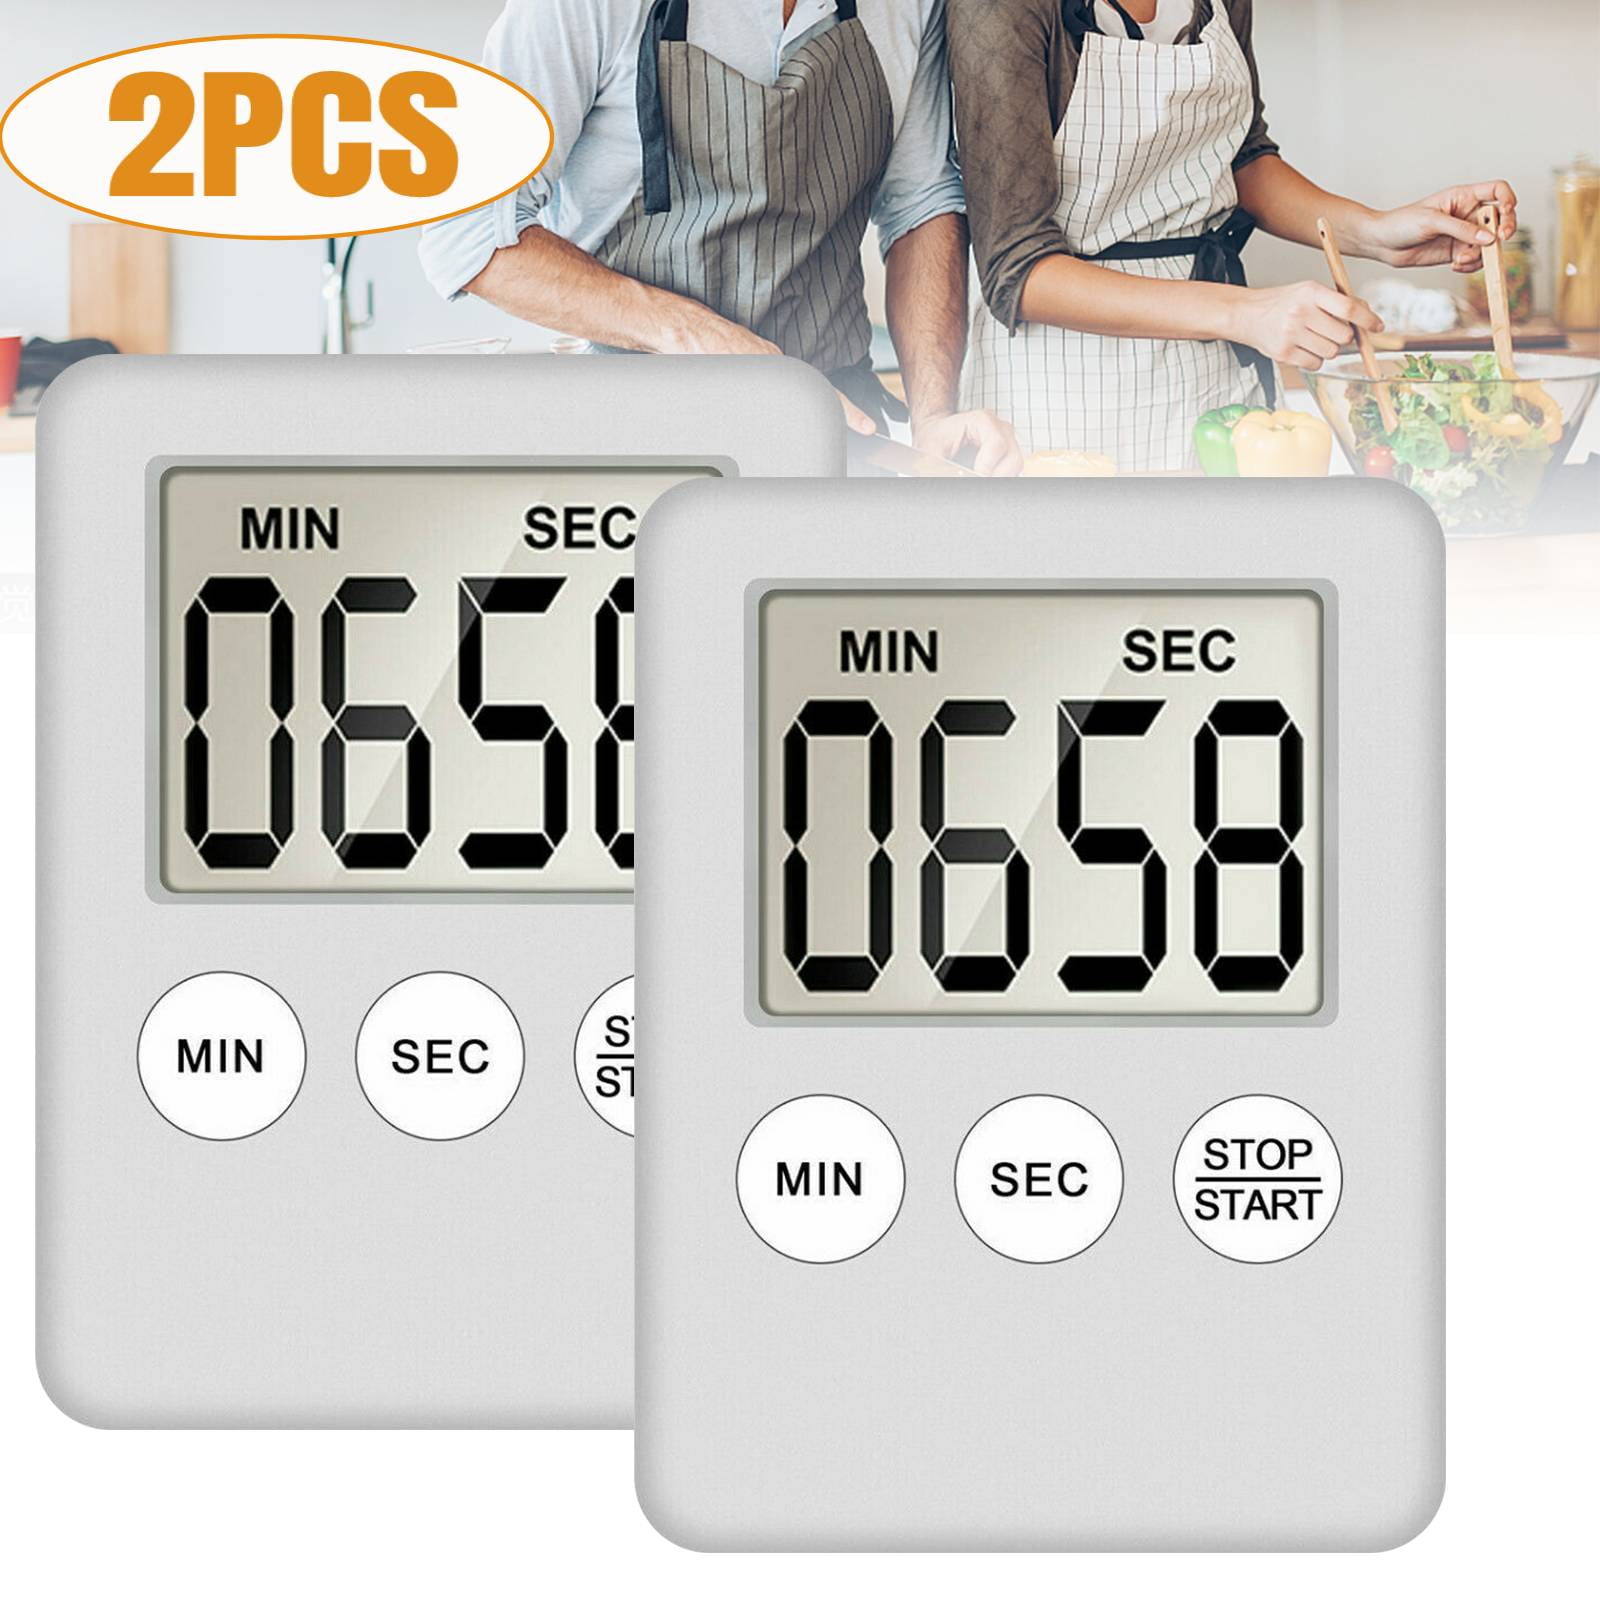 Magnetic Countdown Stopwatch with Adjustable Volume Alarm,LED Display Digital Cooking Timer Shower Fitness Rechargeable Kitchen Timer Fit for Working Classroom